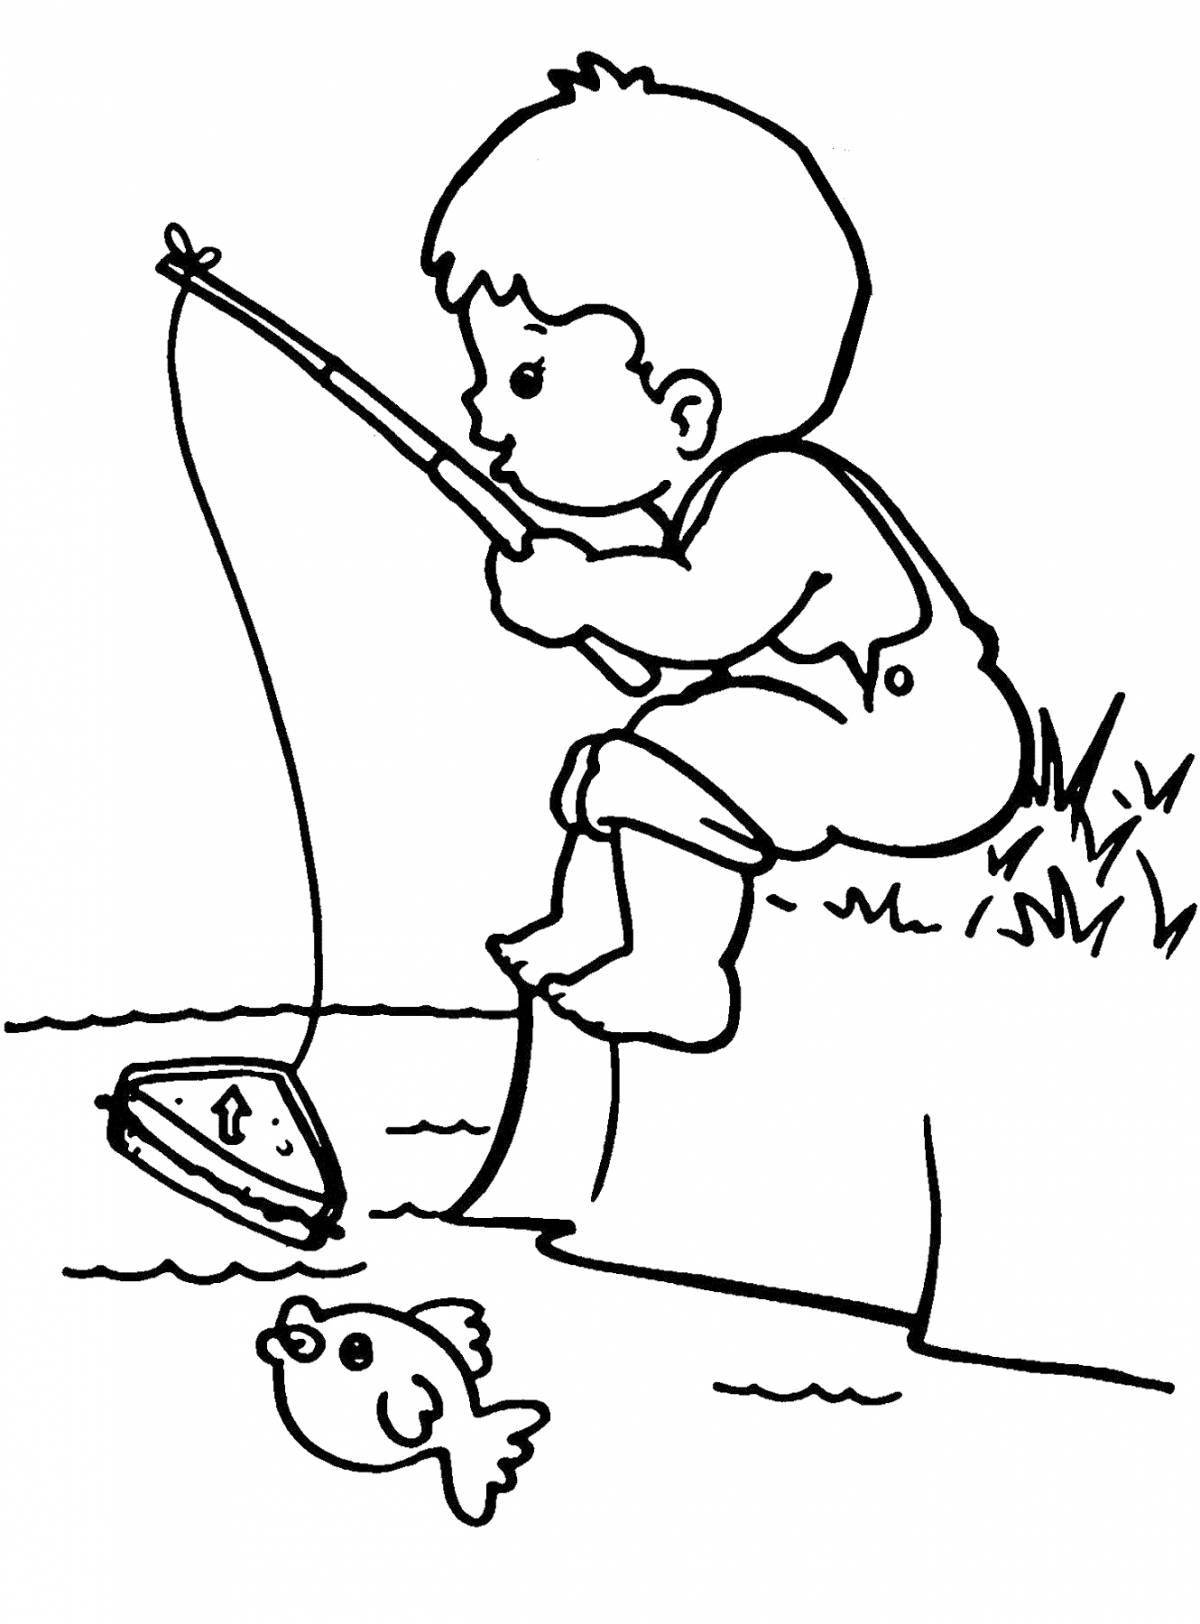 Playful fisherman coloring page for kids